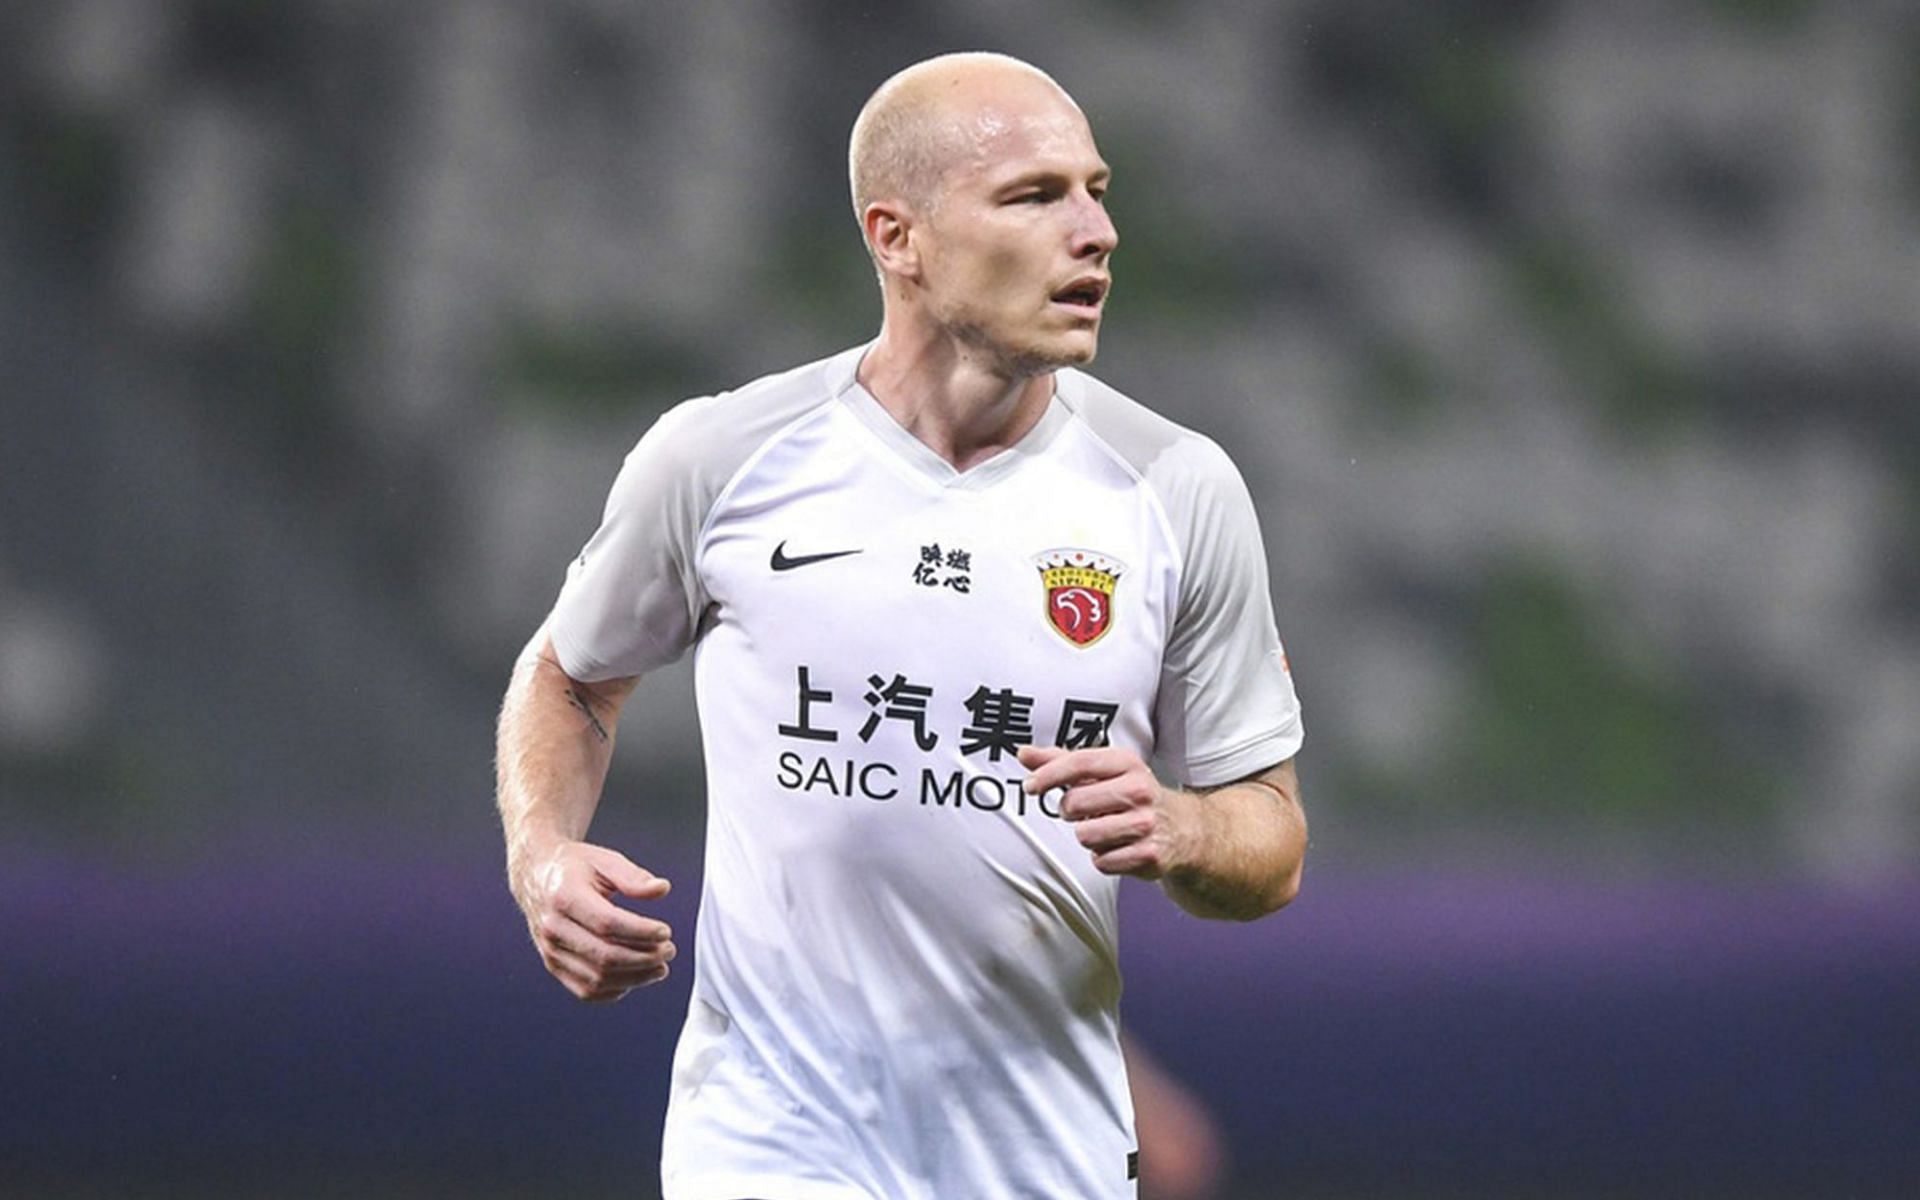 Shanghai Port square off against Guangzhou FC in their final Chinese Super League fixture on Tuesday